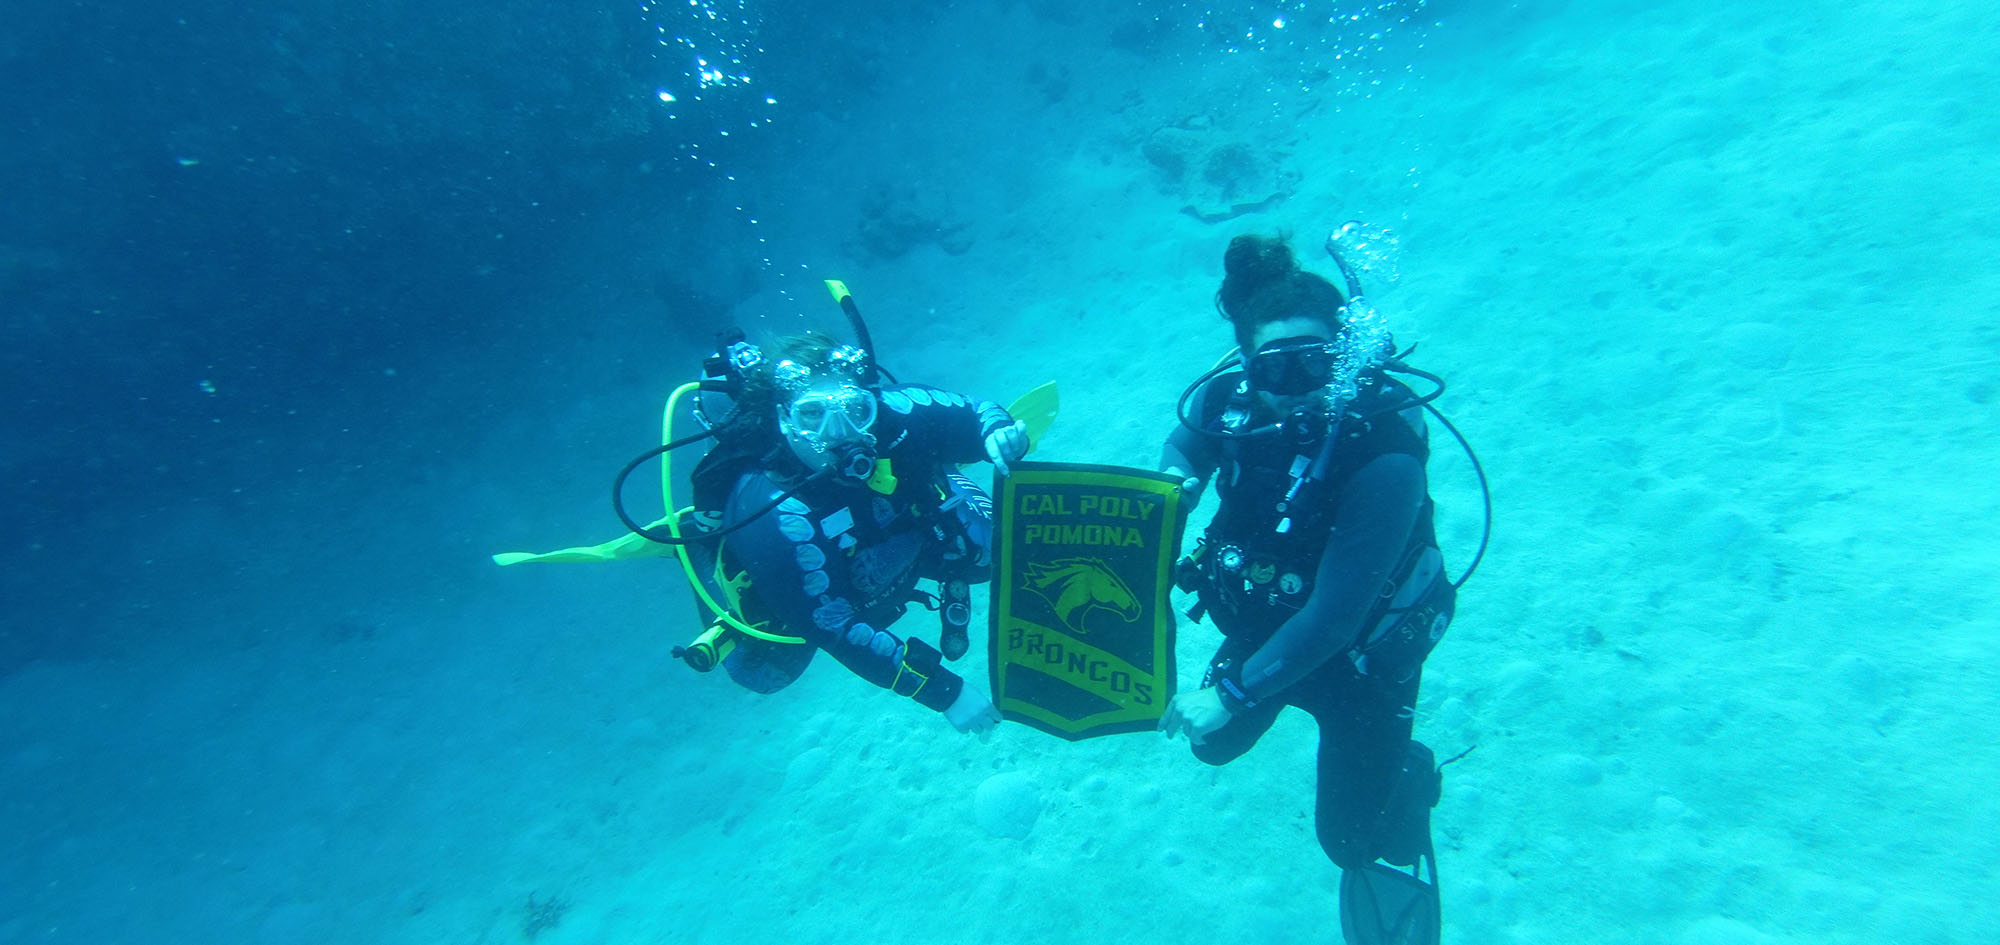 two scuba divers holding a Cal Poly Pomona flag underwater